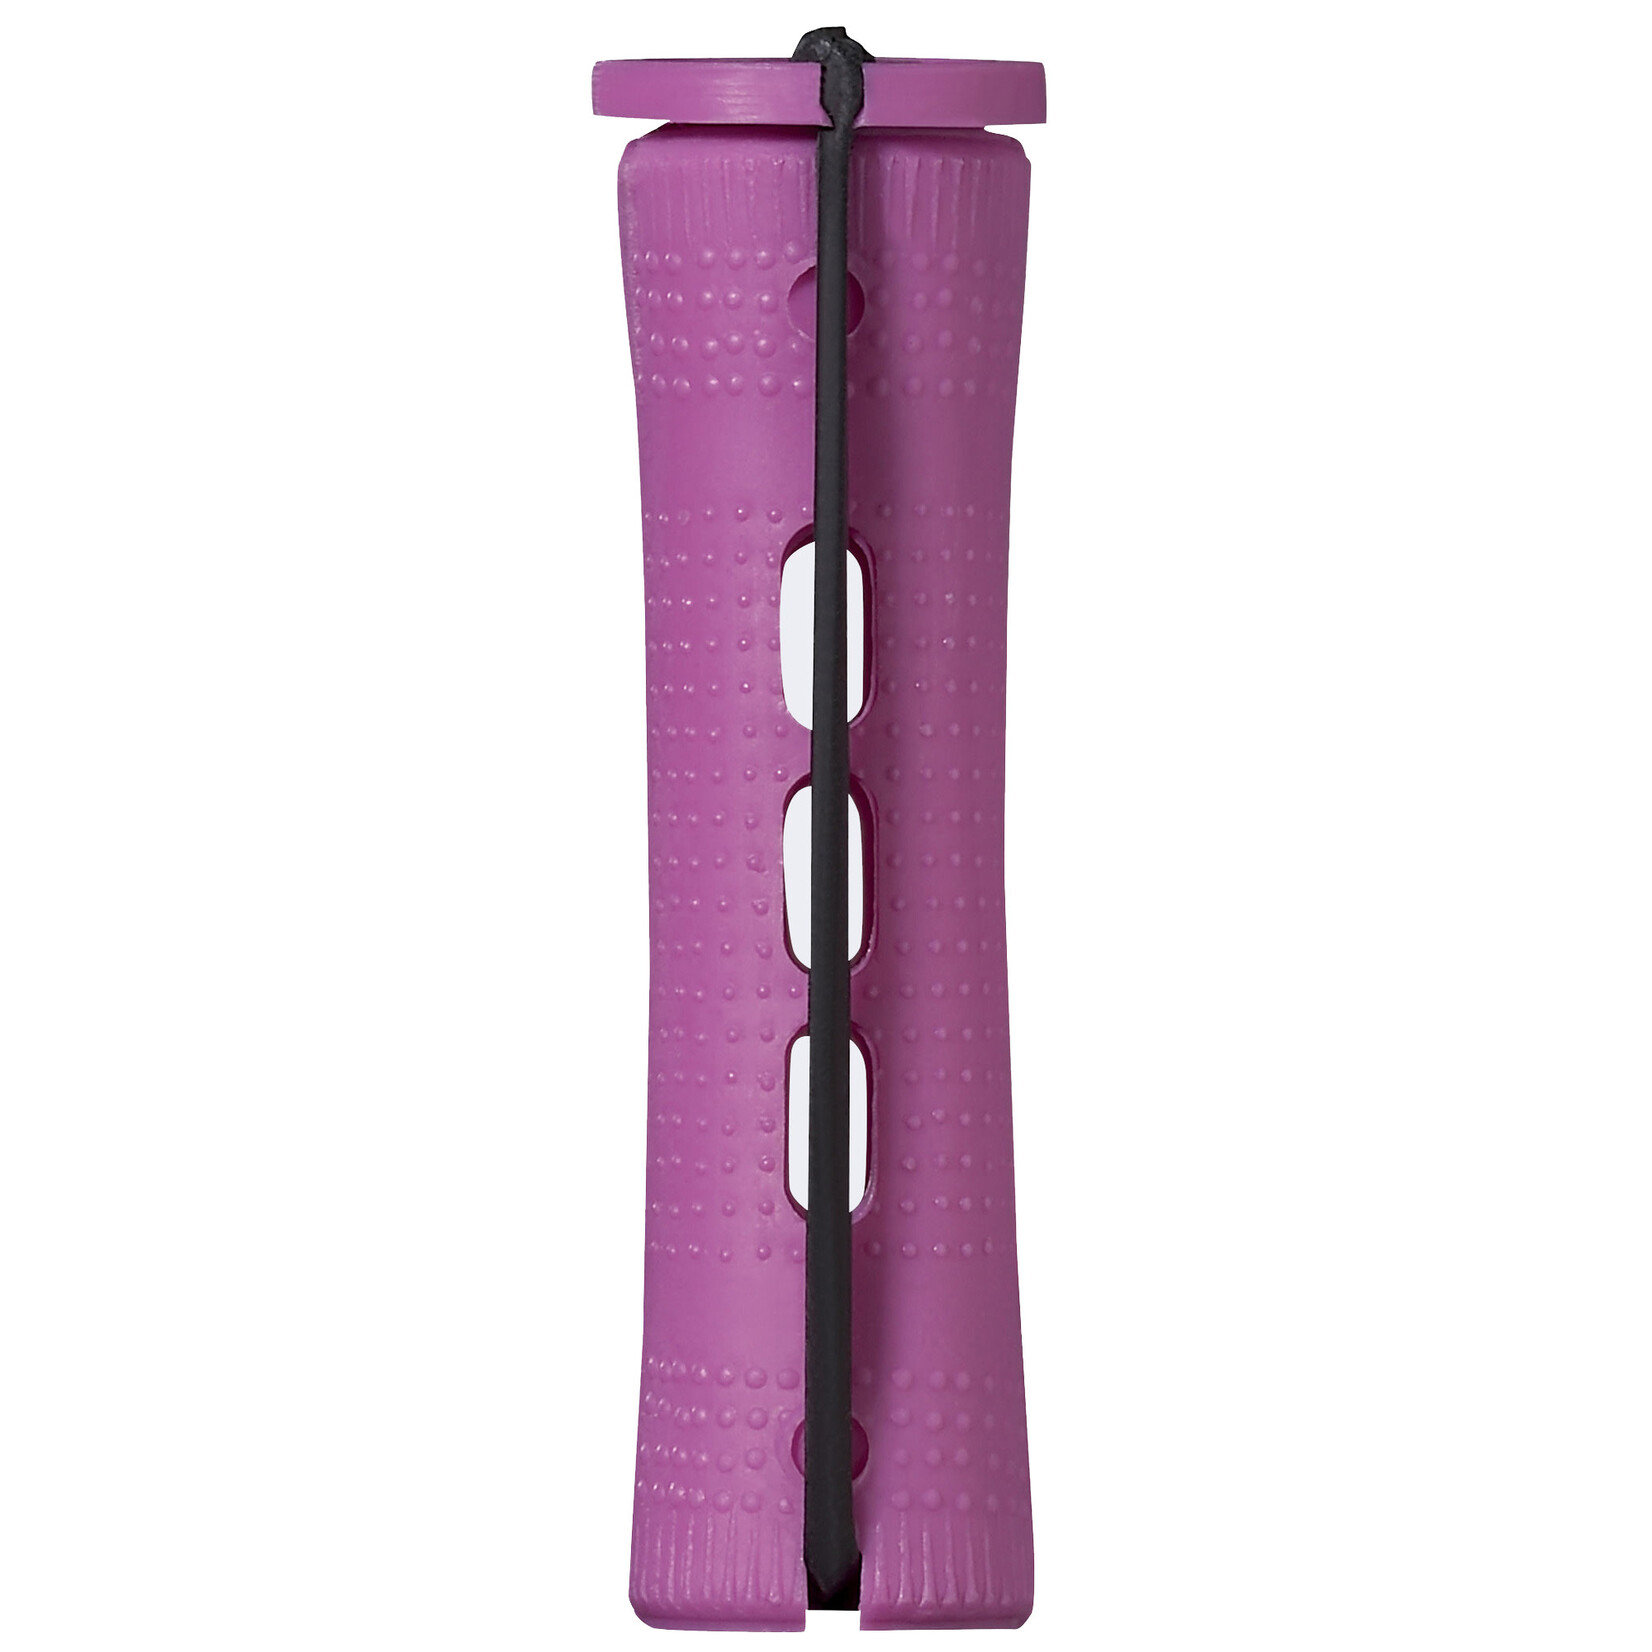 Dannyco Dannyco - Cold Wave Rods - Purple 12/Bag